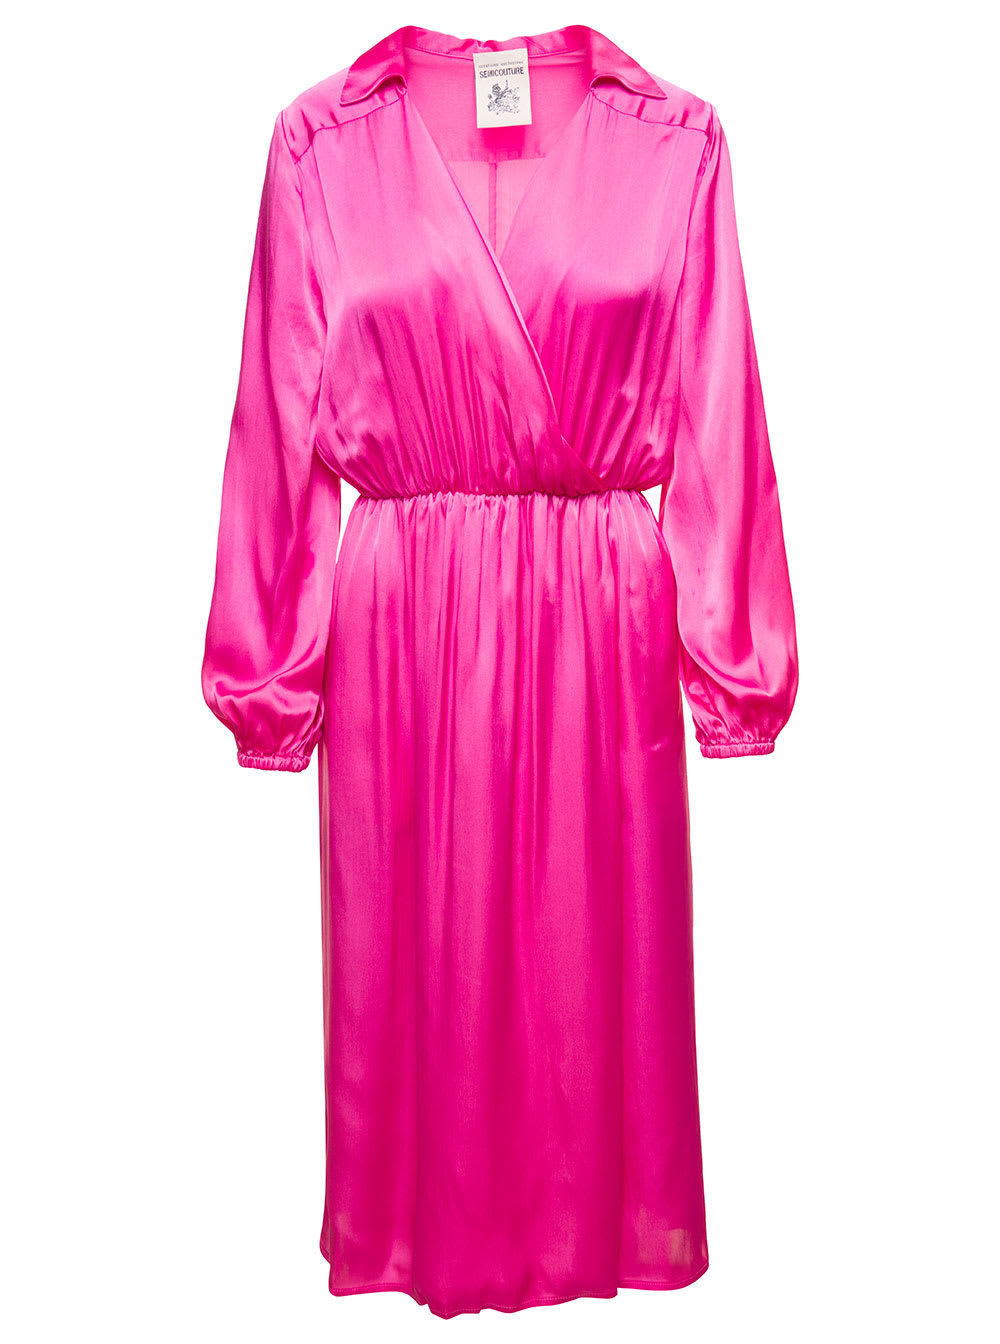 SEMICOUTURE PINK MIDI DRESS WITH V NECK SATIN EFFECT IN ACETATE BLEND WOMAN